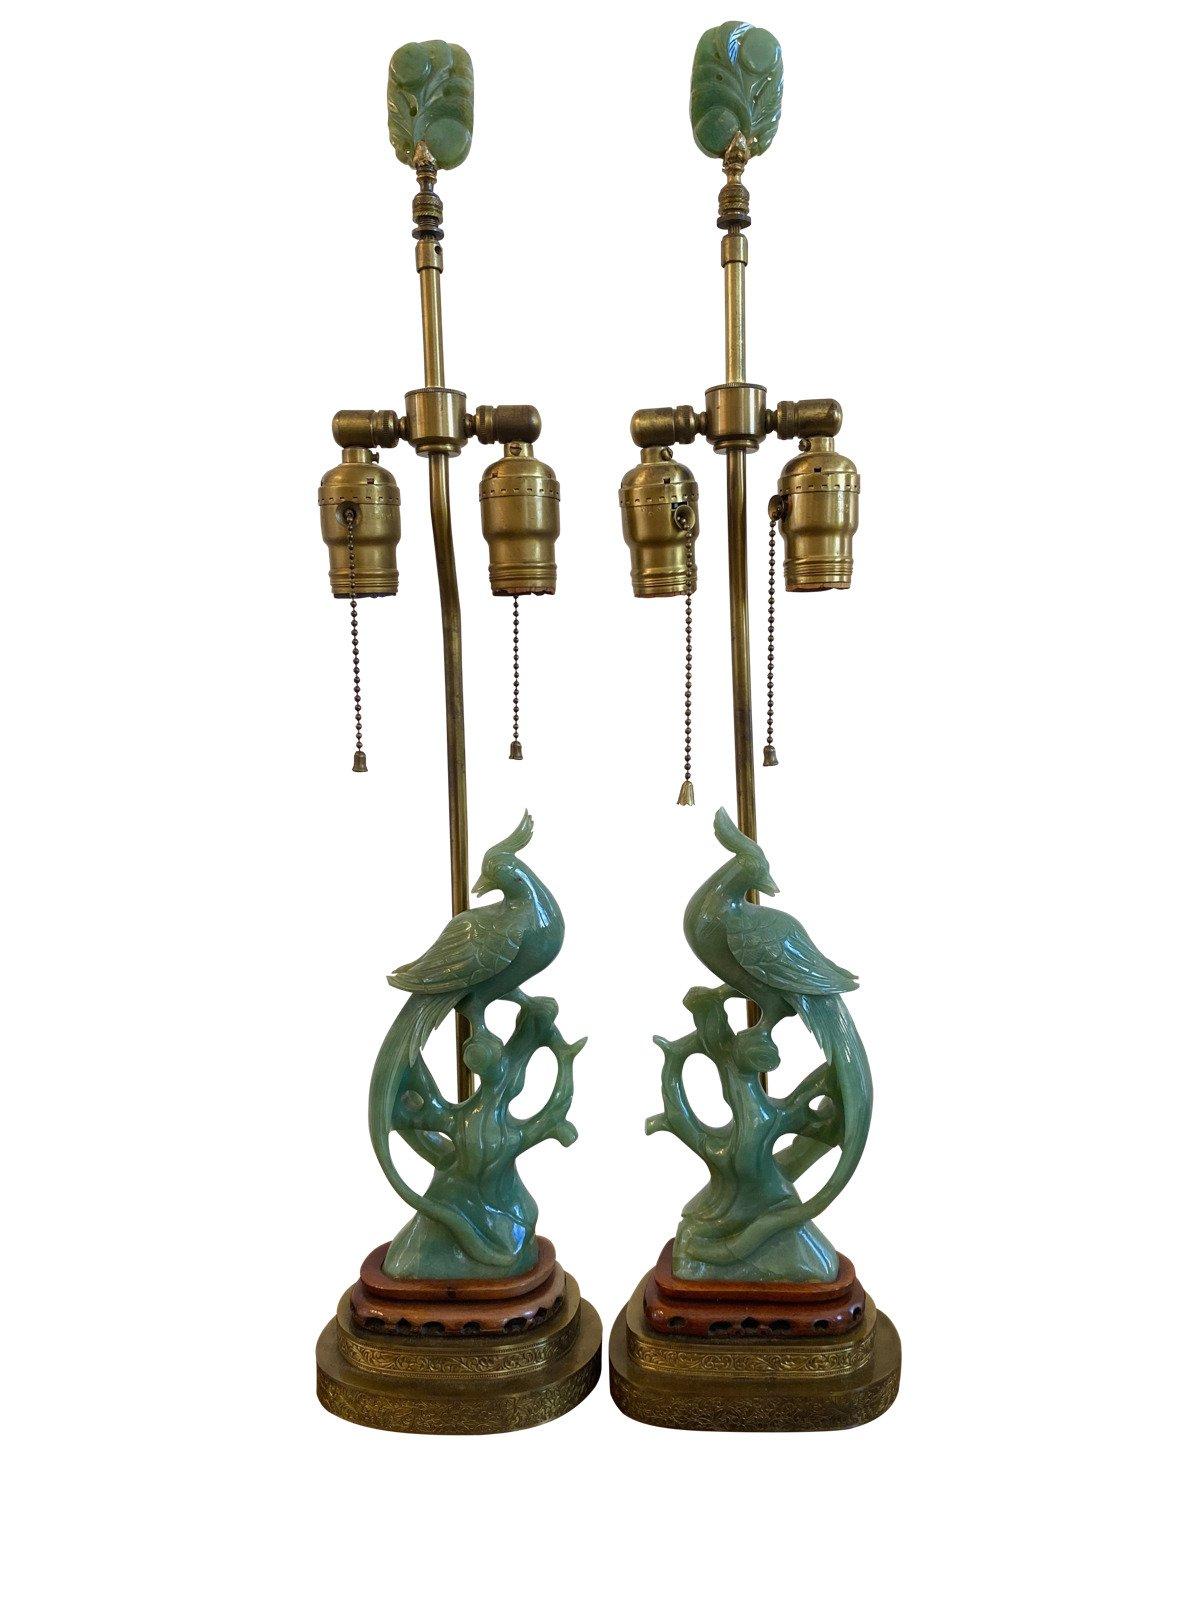 Pair of late 19th-early 20th century carved jade phoenix form lamps, lamp 26” H., phoenix figure 9.5” H. S 5” W x 2” D, lamp base approx. 6” x 4”. With black silk shades.